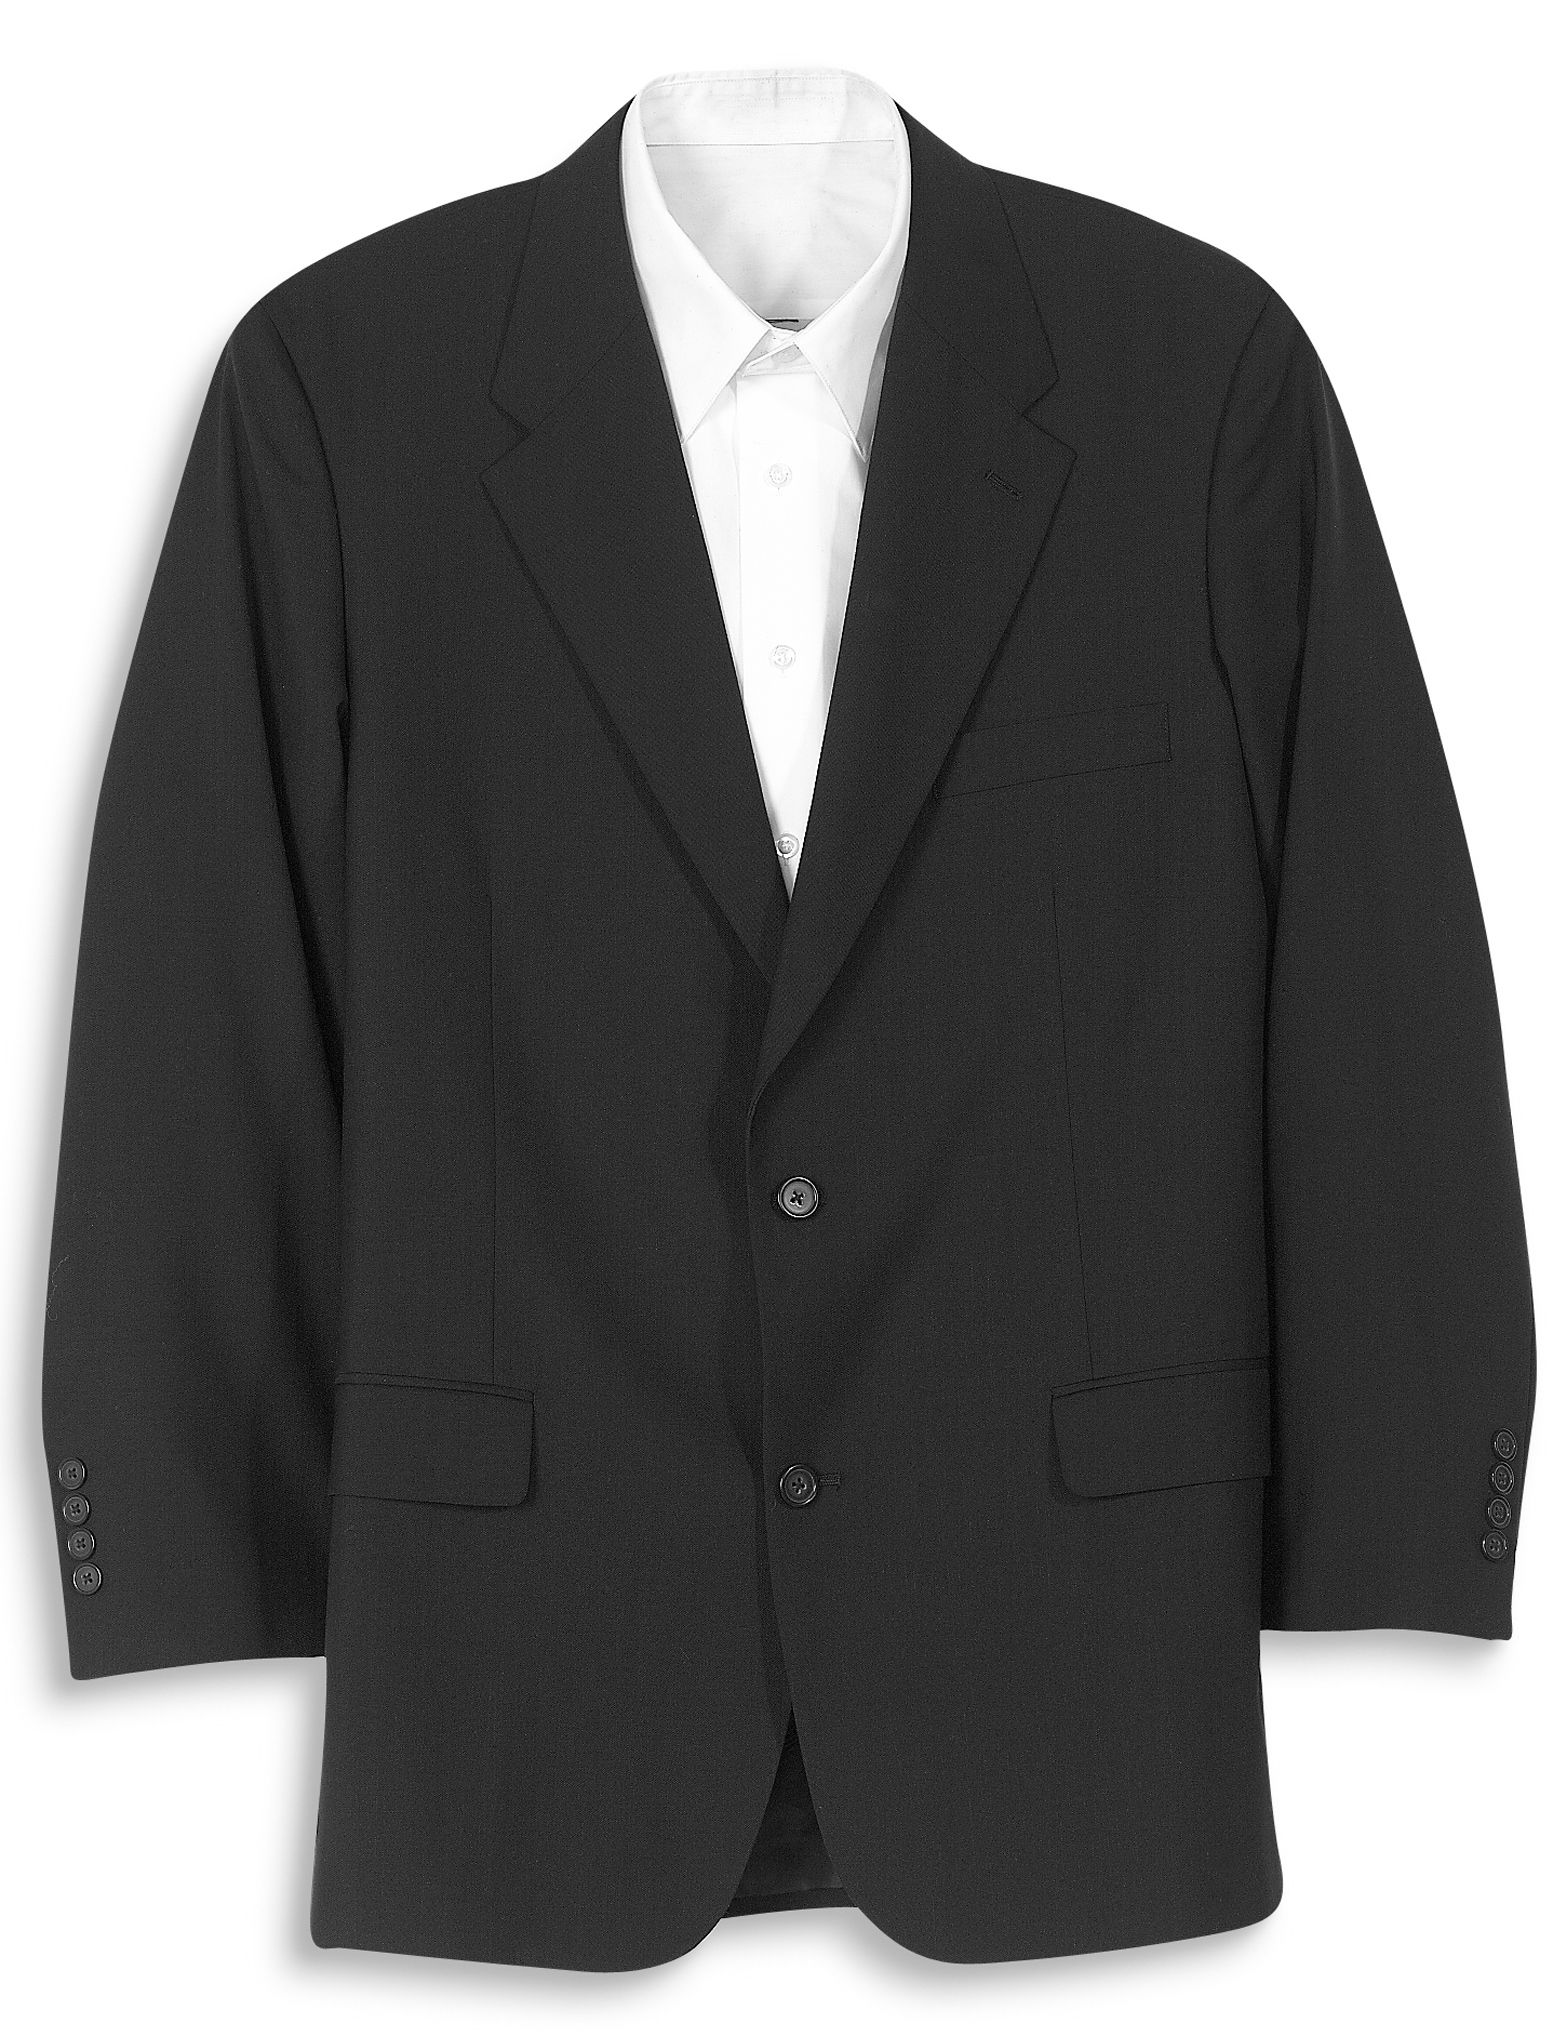 Comfort Zone Jacket Relaxer Men's Two Button Suit Coat - Big & Tall